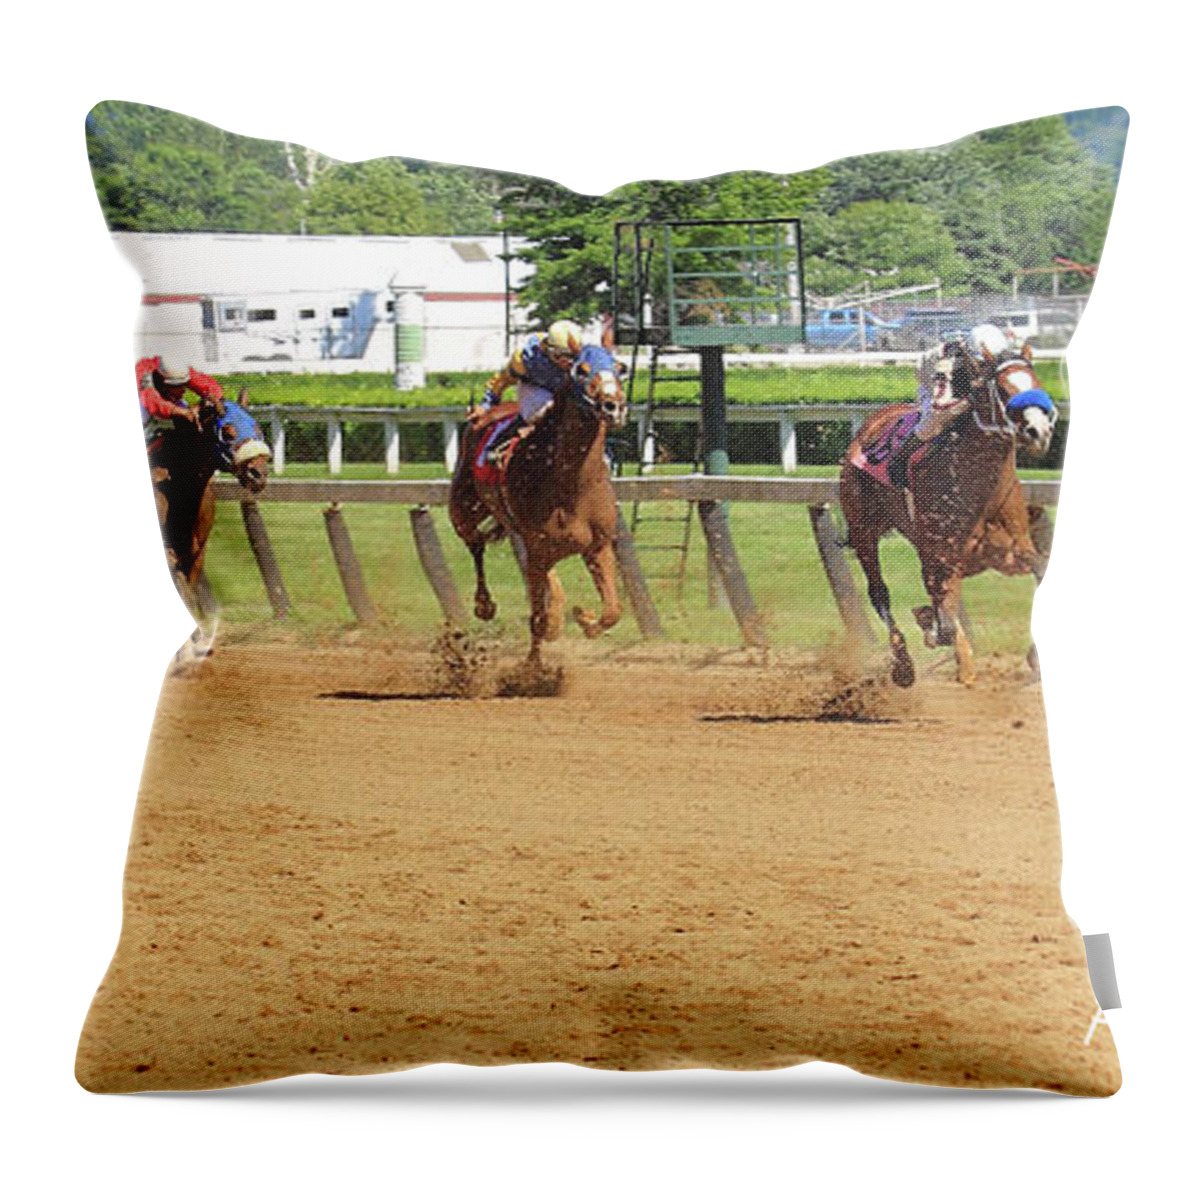 Pjq And Friends Photography Throw Pillow featuring the photograph 'My Gal Sunday' Winner by PJQandFriends Photography